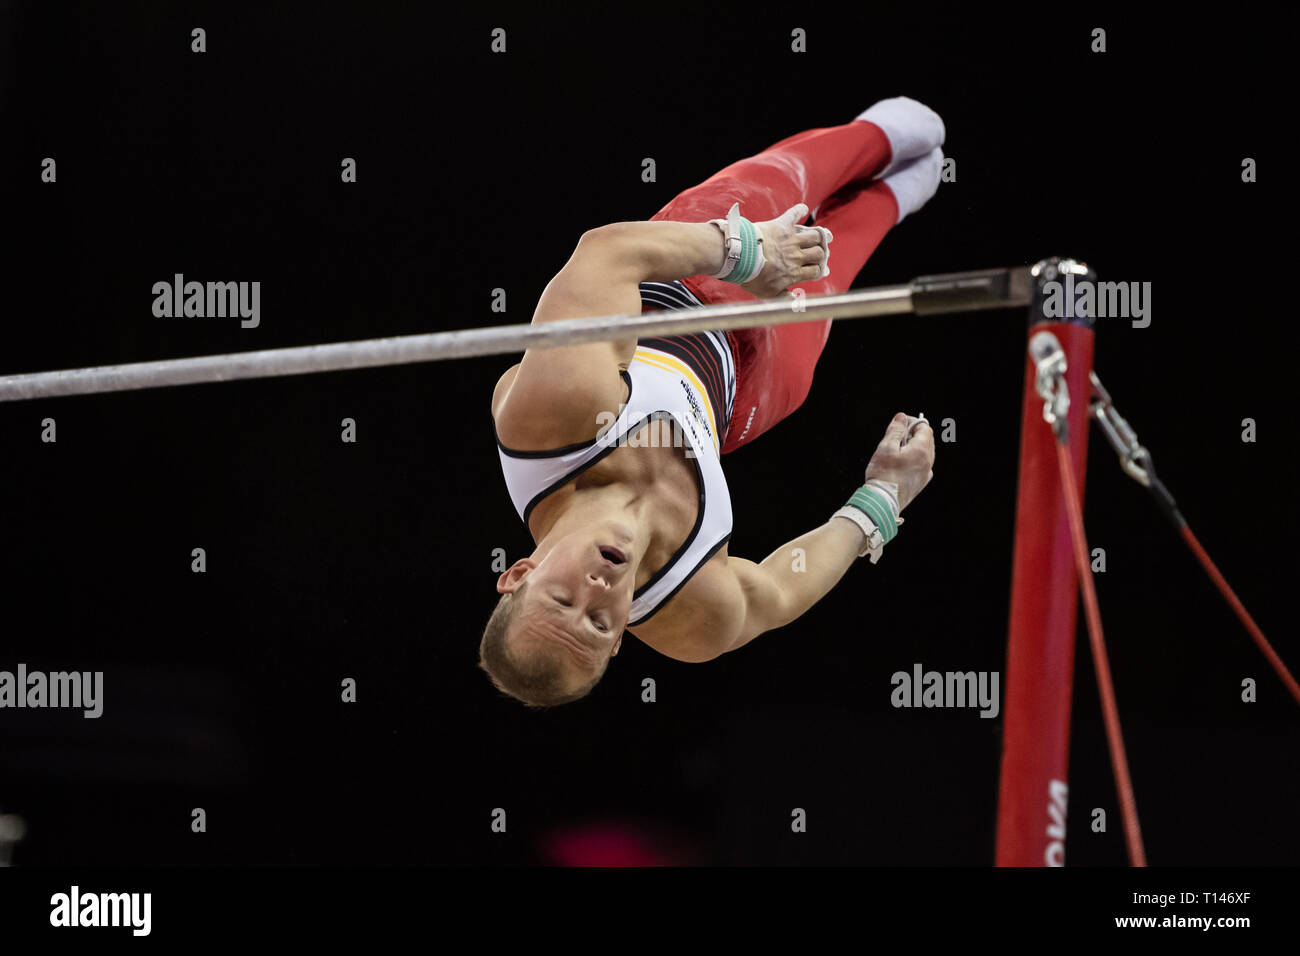 London, UK. 23rd March, 2019. Fabian Hambuchen of Germany performs High Bar during the Matchroom Multisport presents the 2019 Superstars of Gymnastics at The O2 Arena on Saturday, 23 March 2019. LONDON ENGLAND. Credit: Taka G Wu/Alamy News Stock Photo